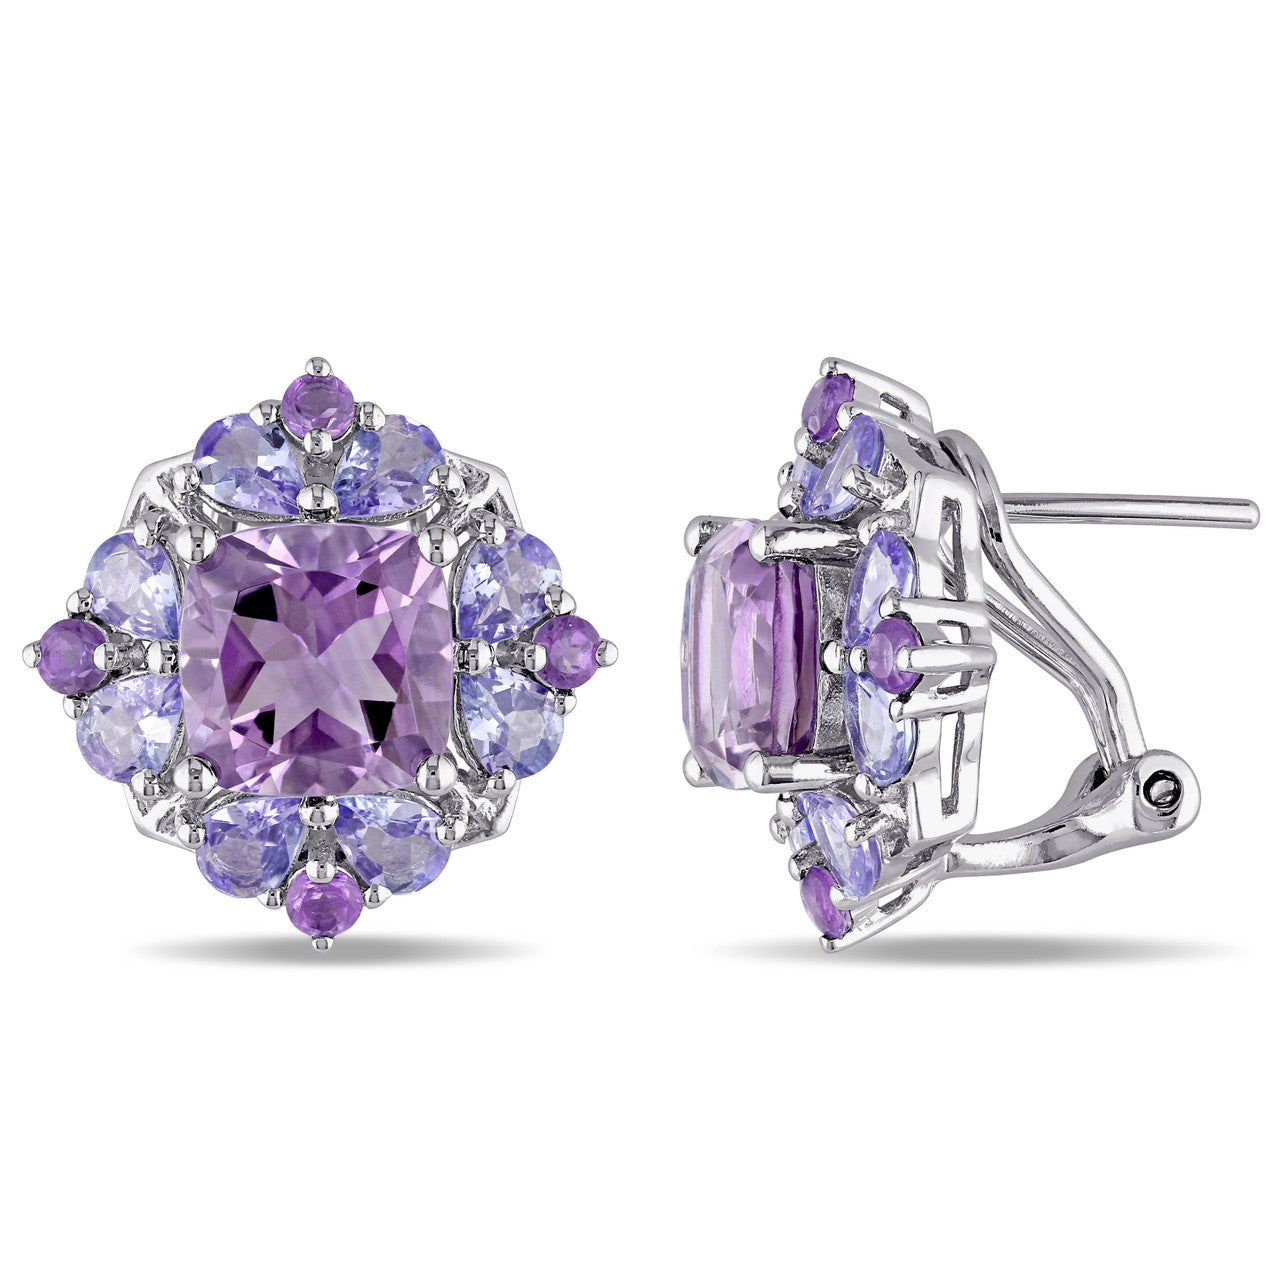 Ice Jewellery 5 7/8 CT TW Amethyst And Tanzanite Fashion Earrings In Sterling Silver - 75000005932 | Ice Jewellery Australia